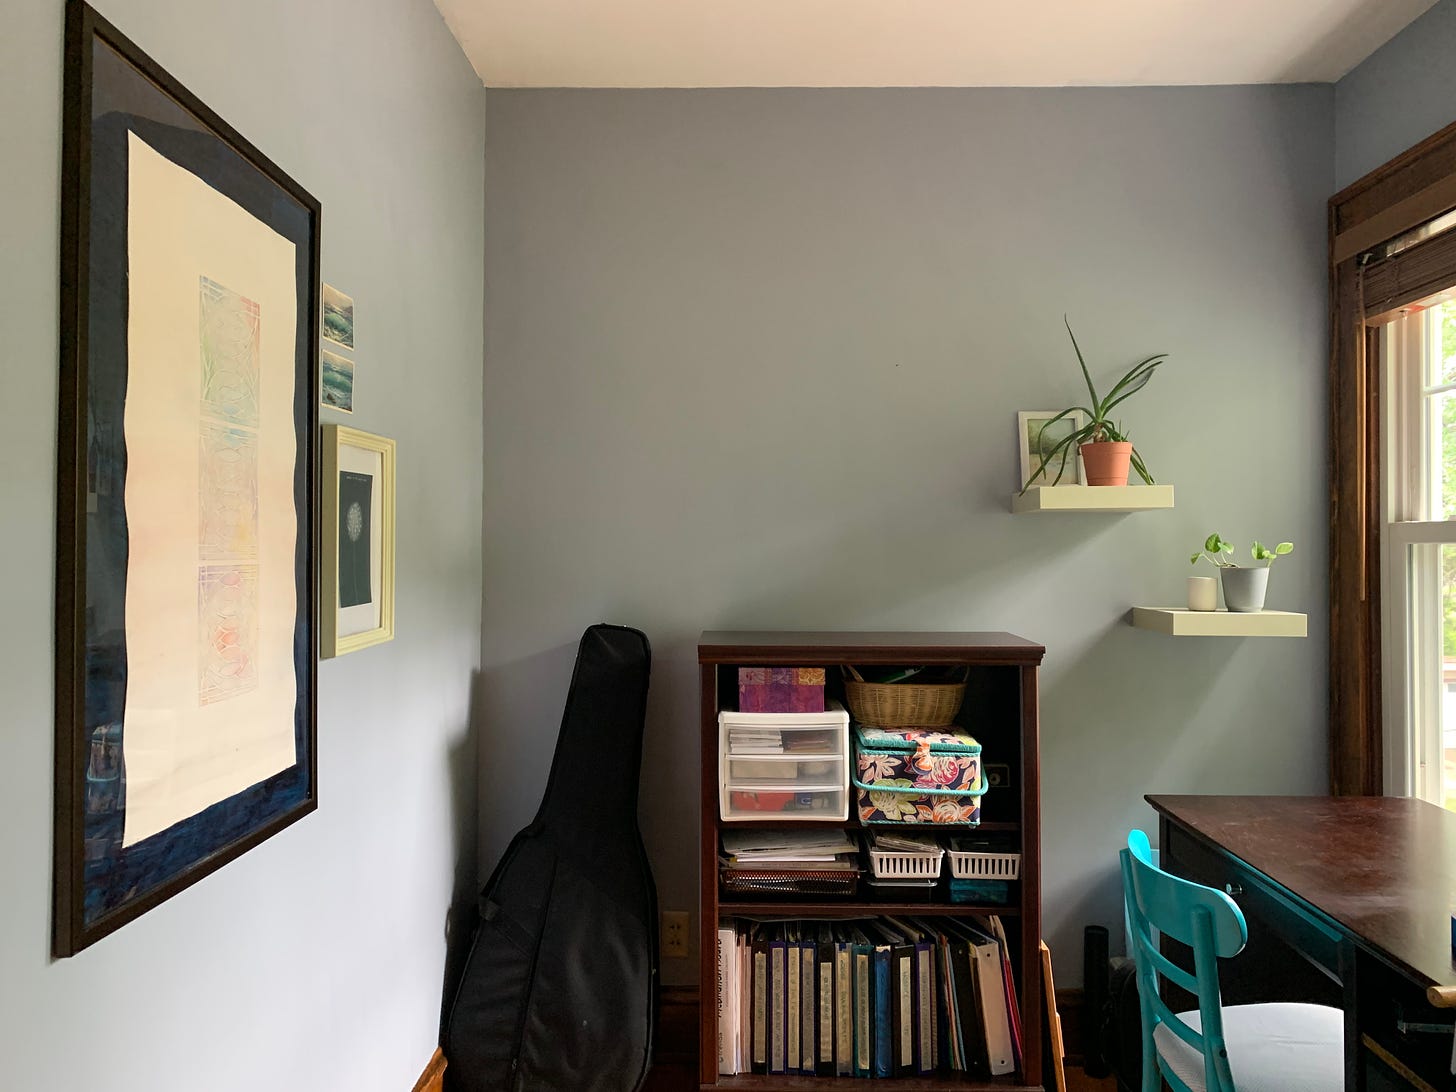 A small room with art on the wall plus a book case and desk.